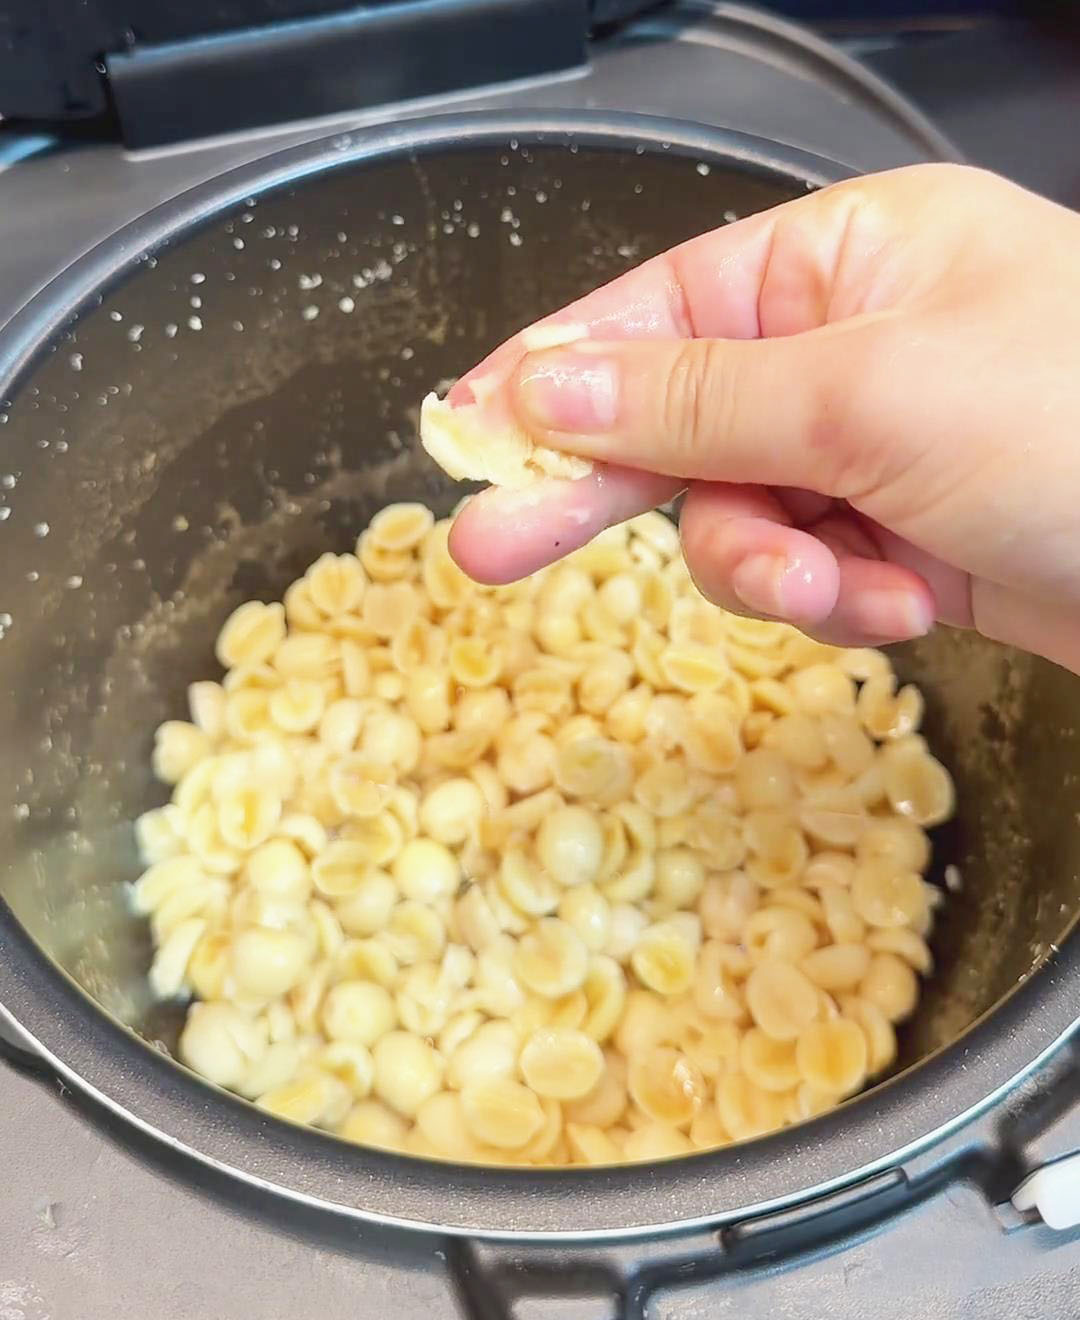 Cook the lotus seeds until they become soft enough to be easily mashed with your hands